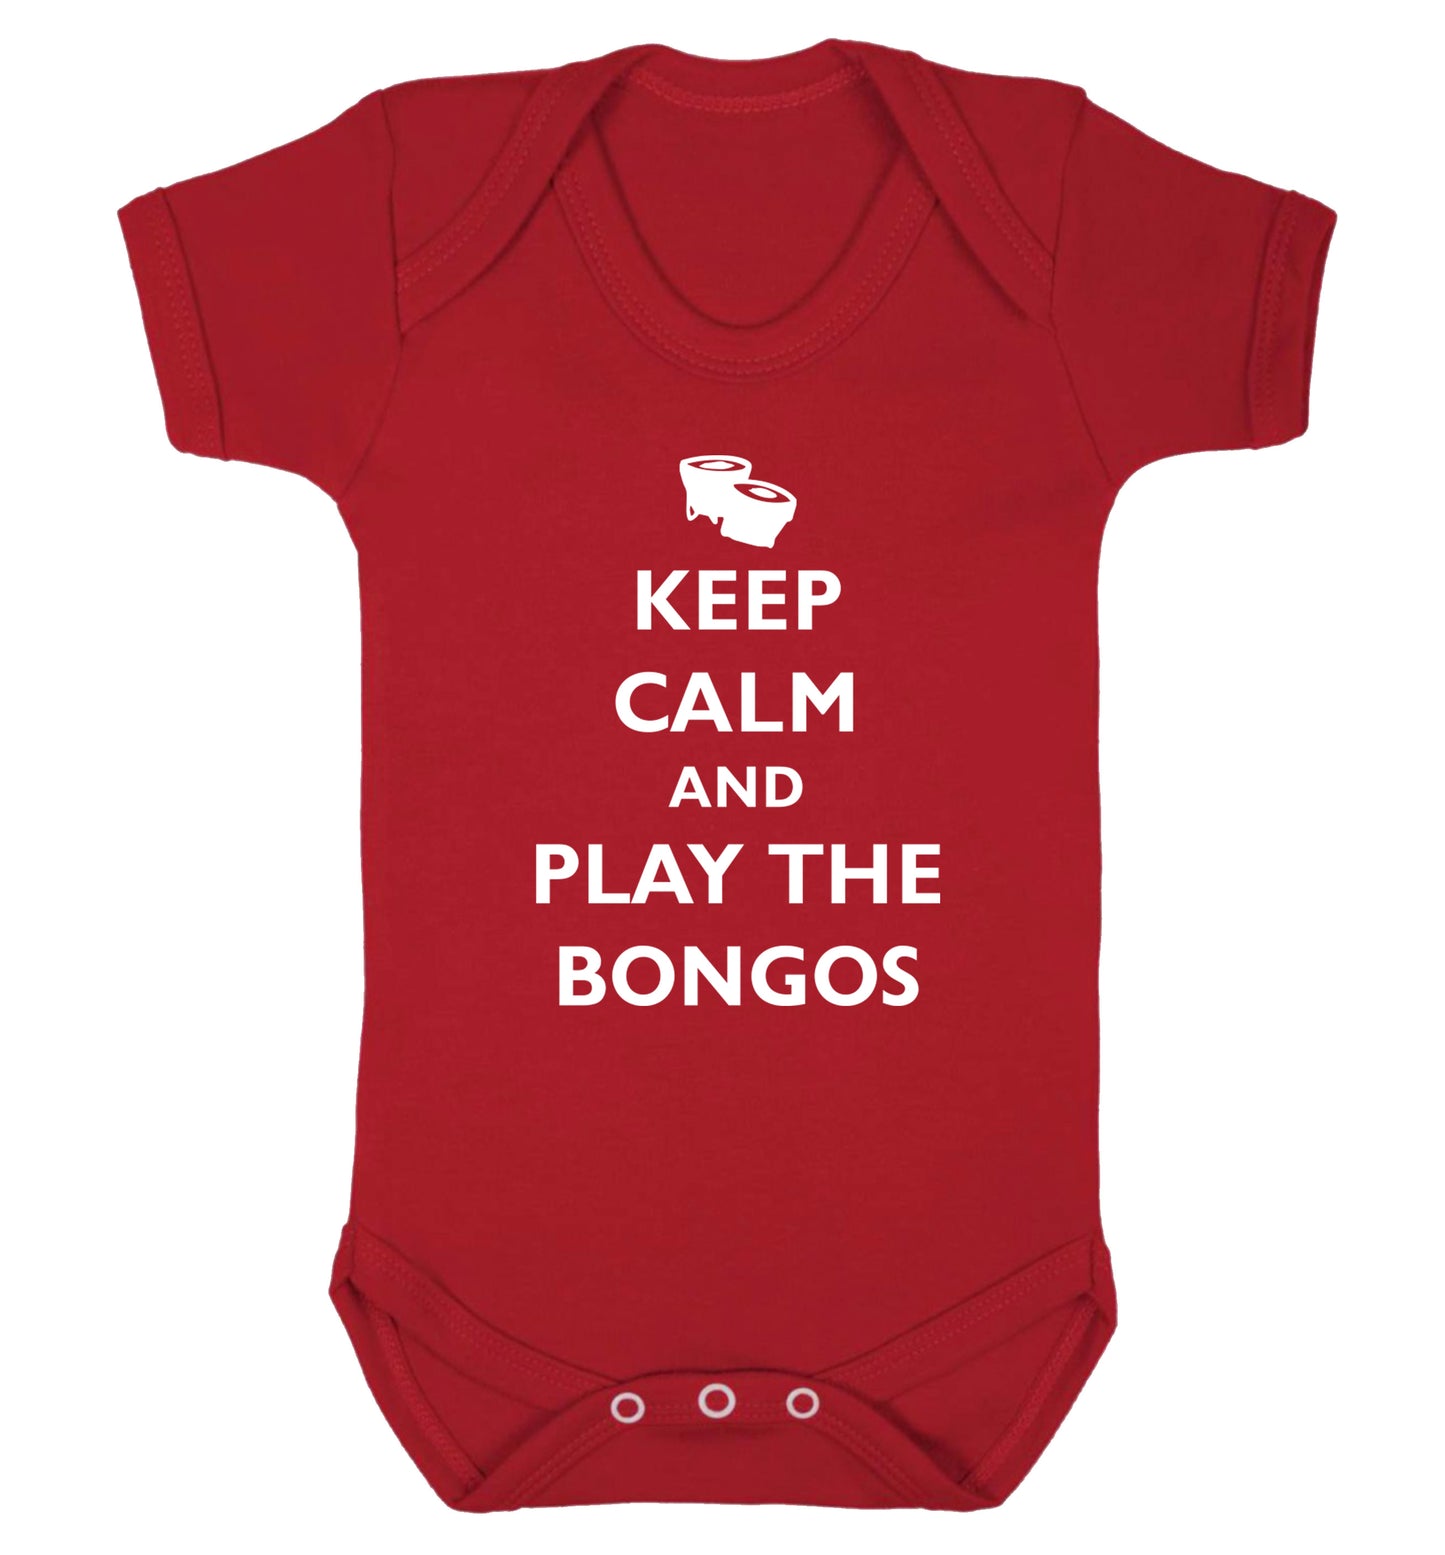 Keep calm and play the bongos Baby Vest red 18-24 months